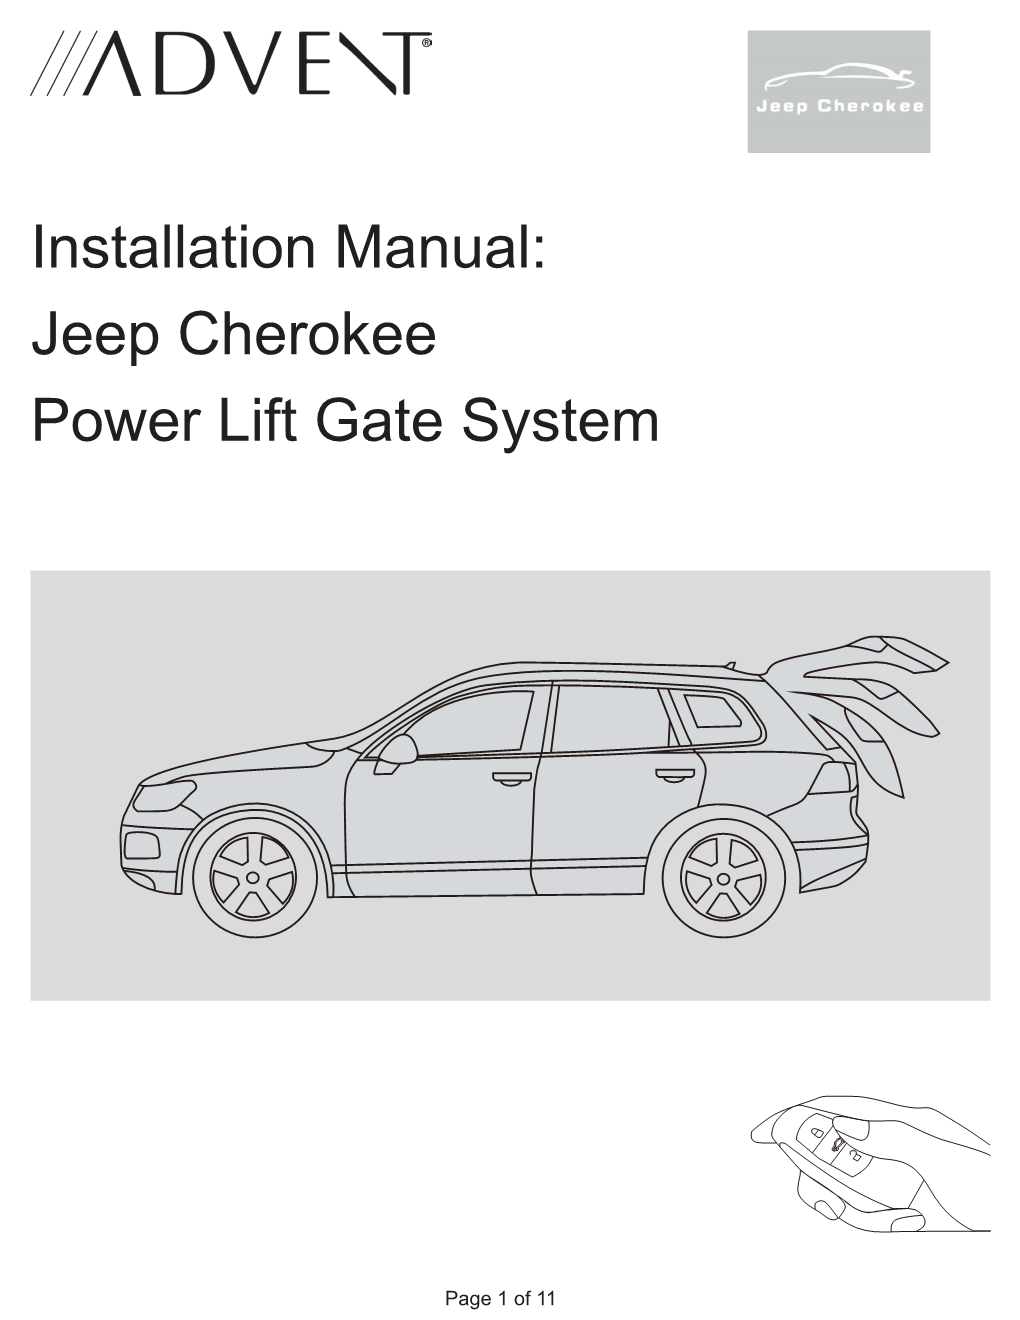 Installation Manual: Jeep Cherokee Power Lift Gate System